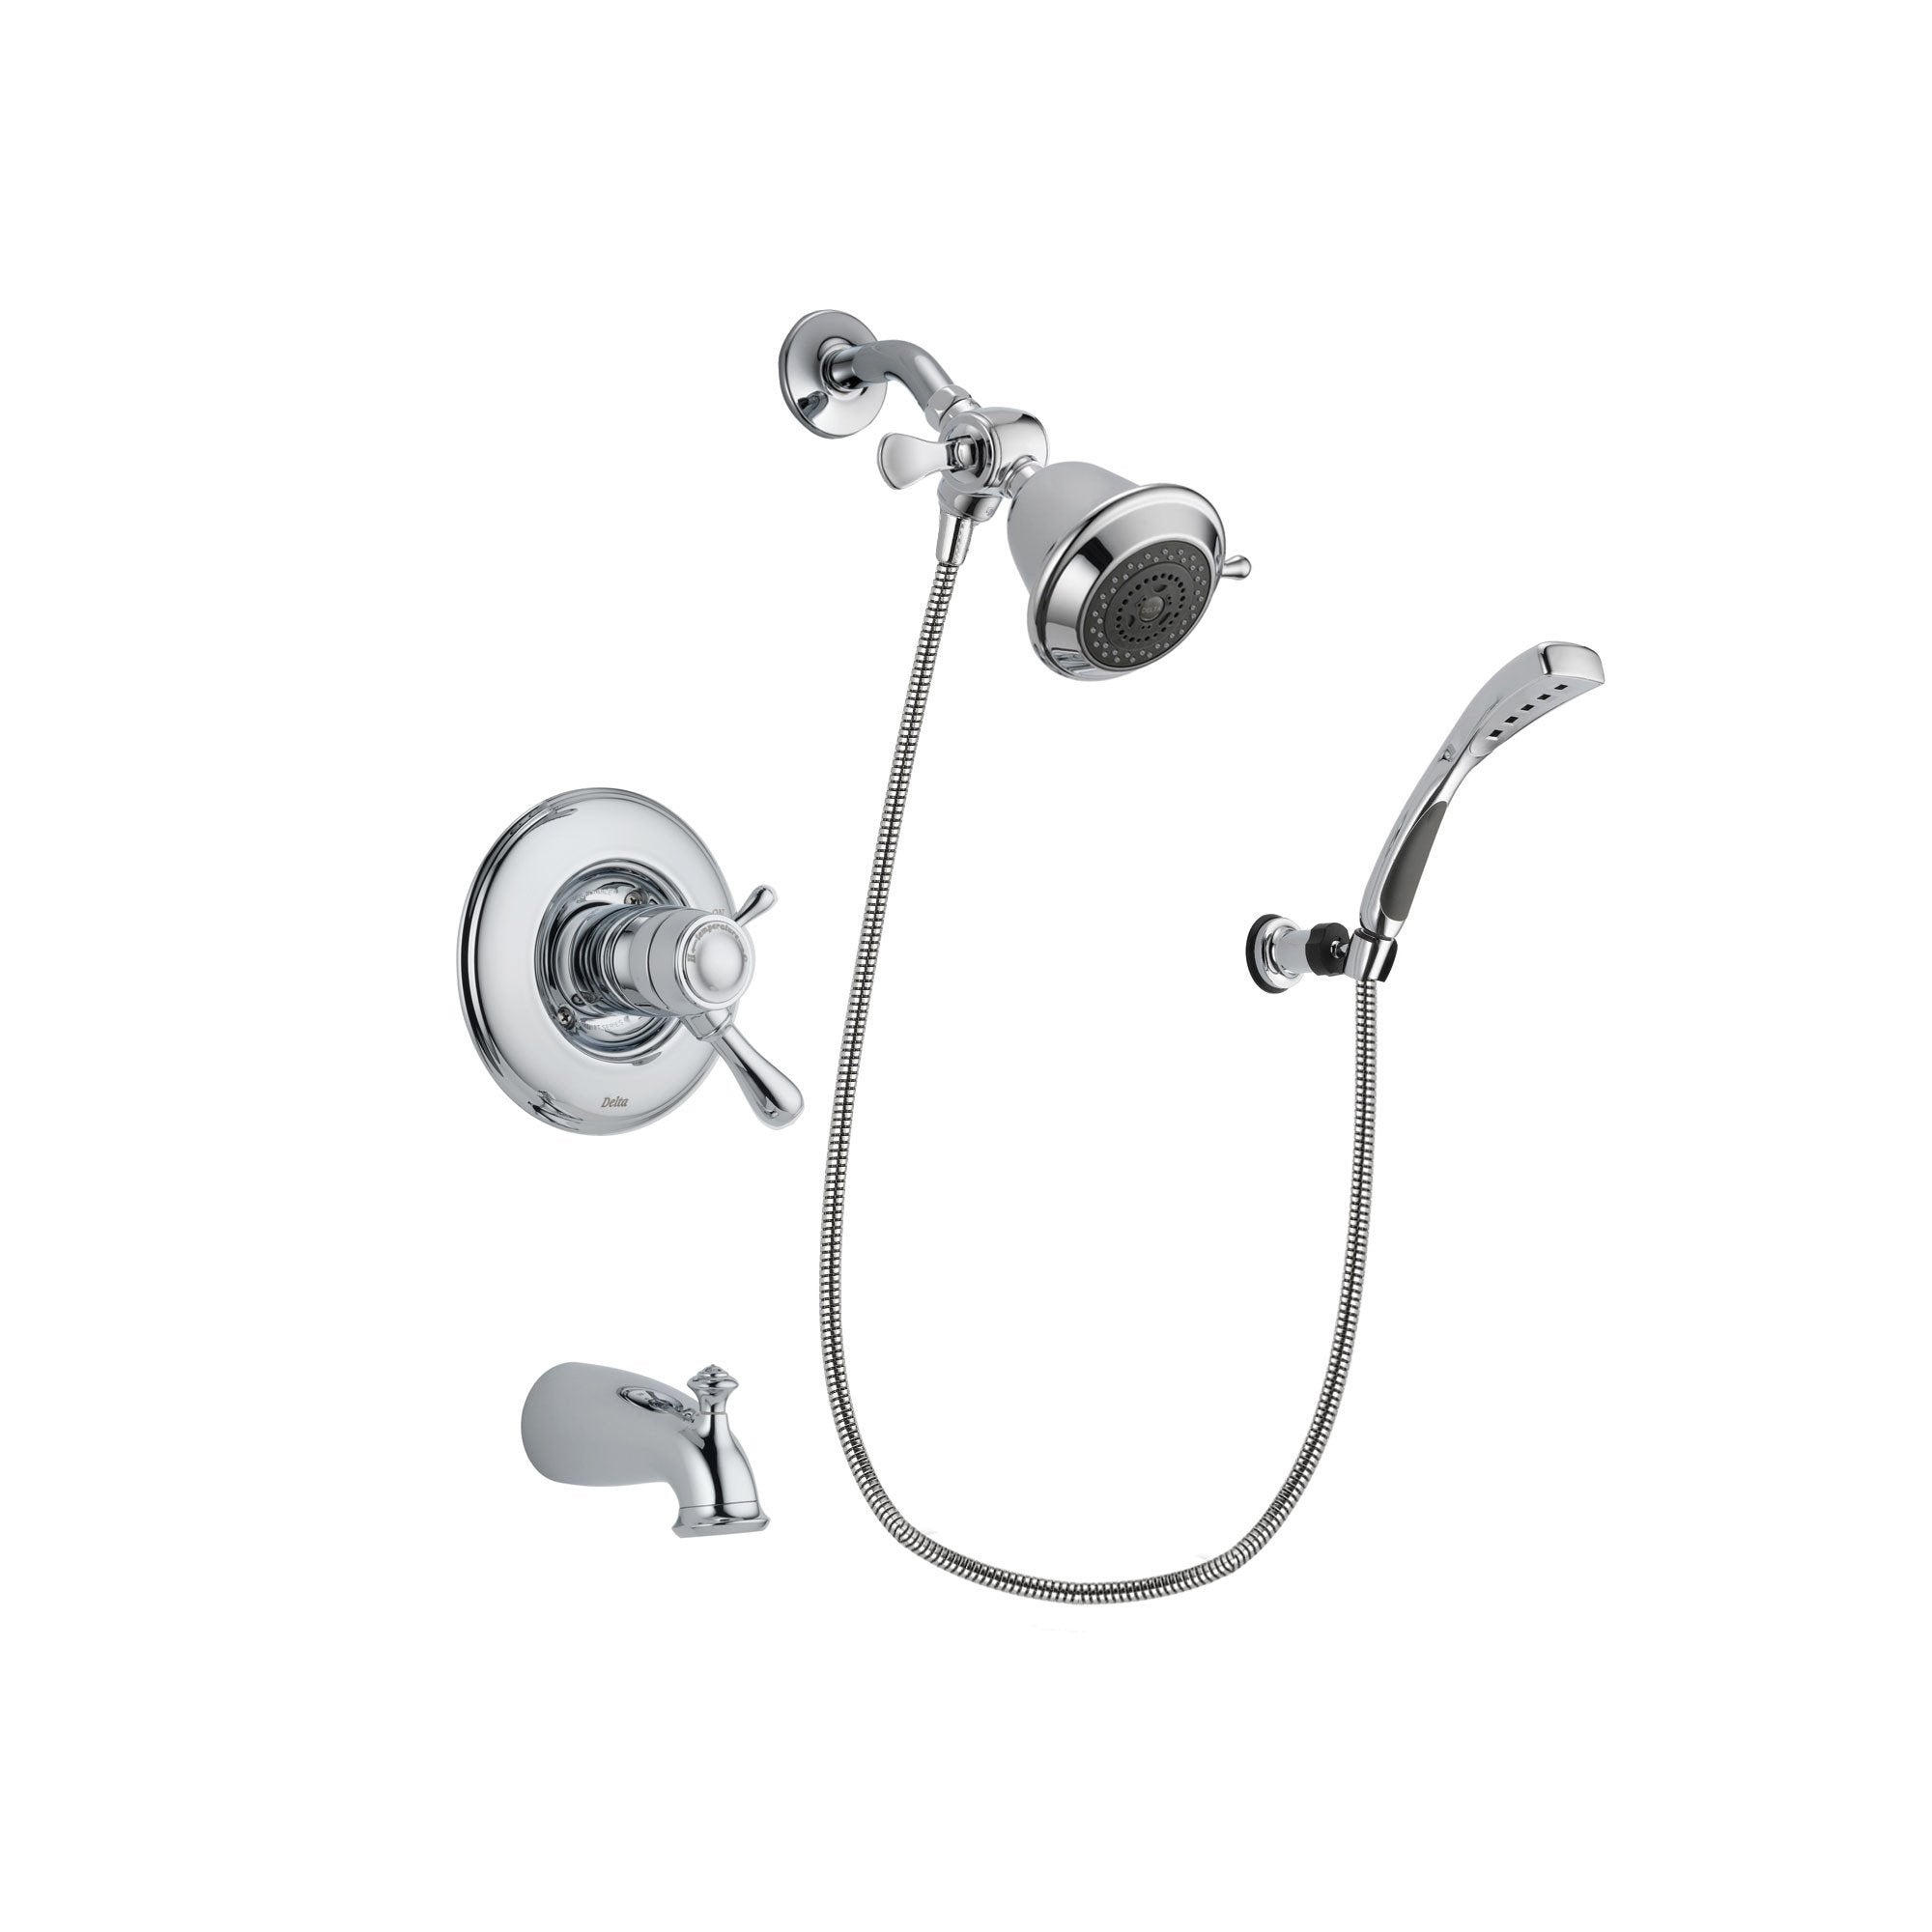 Delta Leland Chrome Finish Thermostatic Tub and Shower Faucet System Package with Shower Head and Wall-Mount Bracket with Handheld Shower Spray Includes Rough-in Valve and Tub Spout DSP0973V